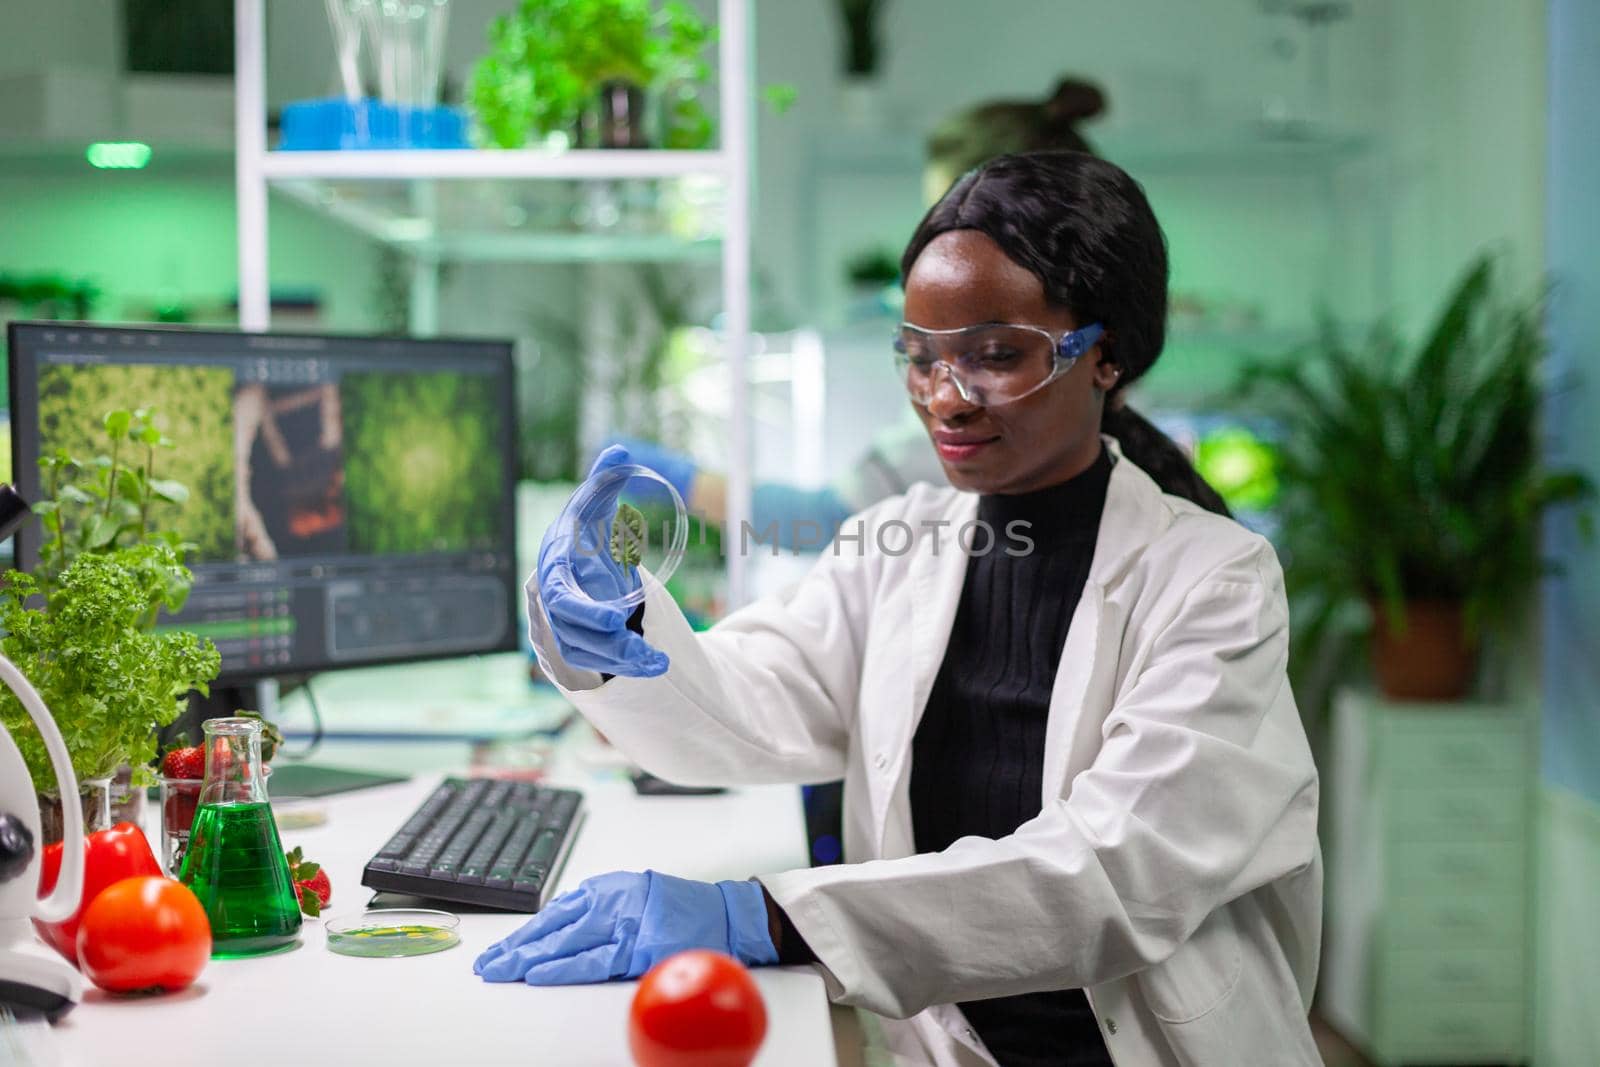 Close up of african scientist looking at petri dish with green leaf examining plant expertise. In background her collegue analyzing dna sample working in biochemistry laboratory.